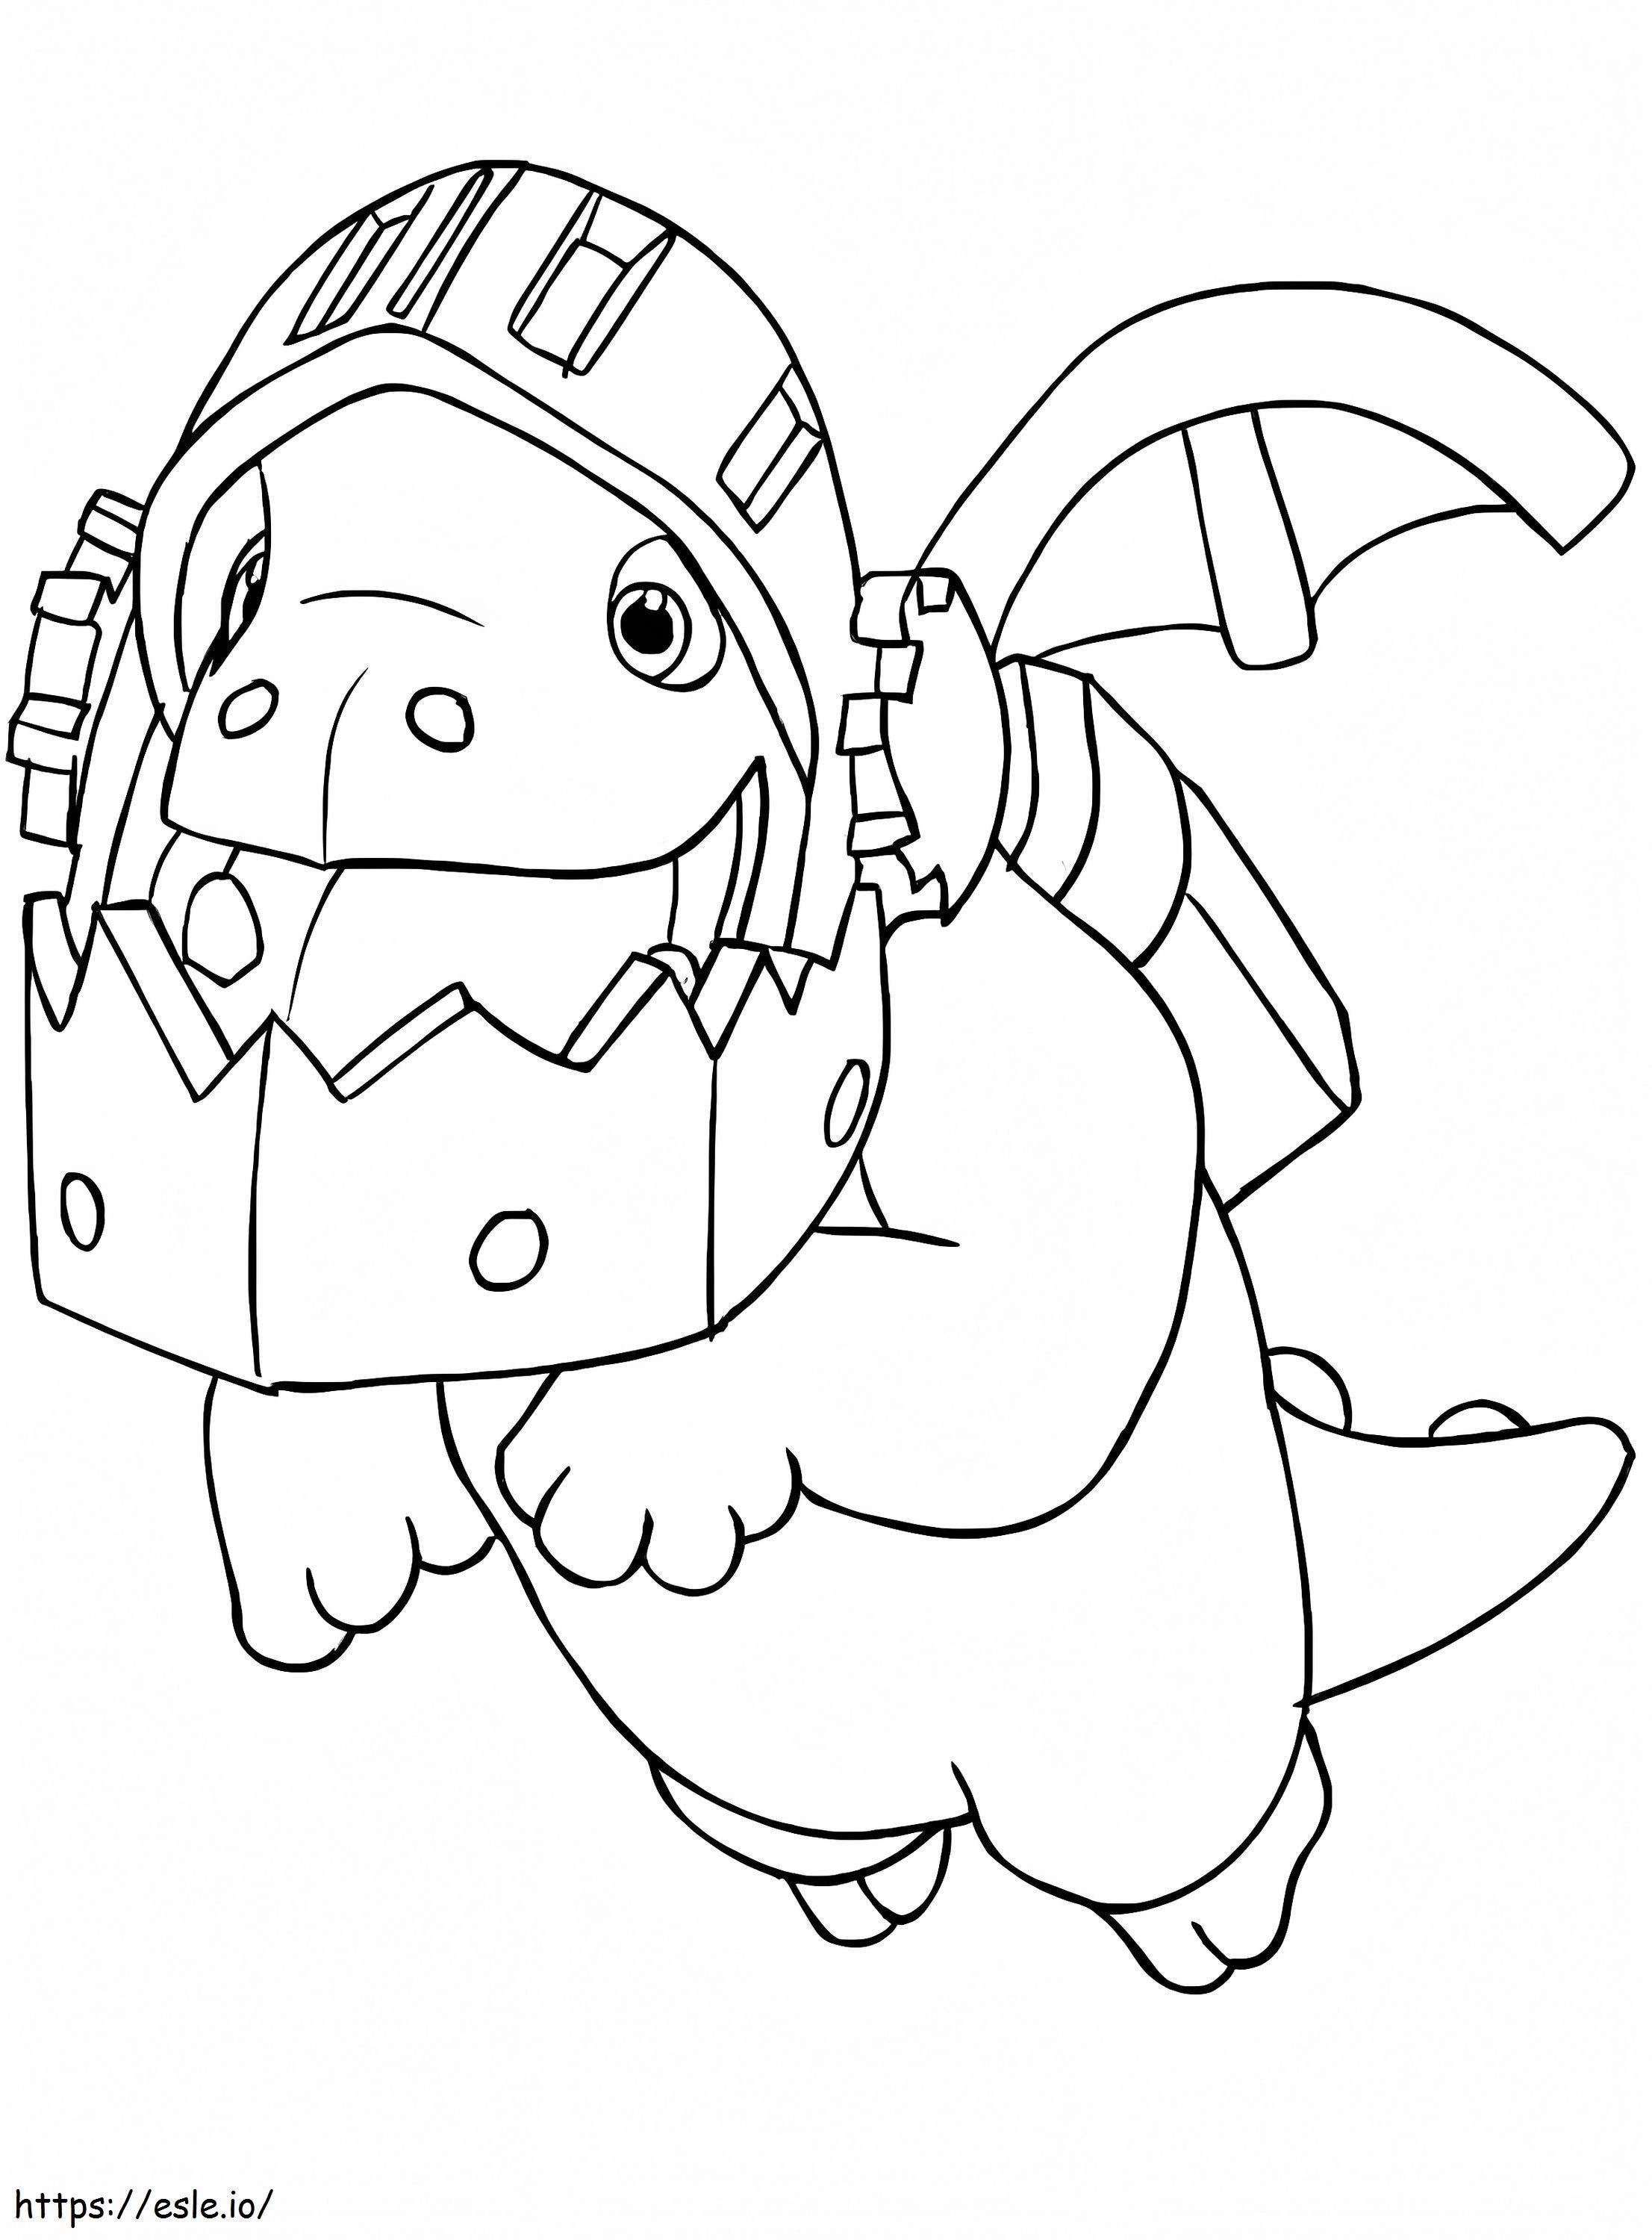 Dragon With Helmet Clash Royal coloring page